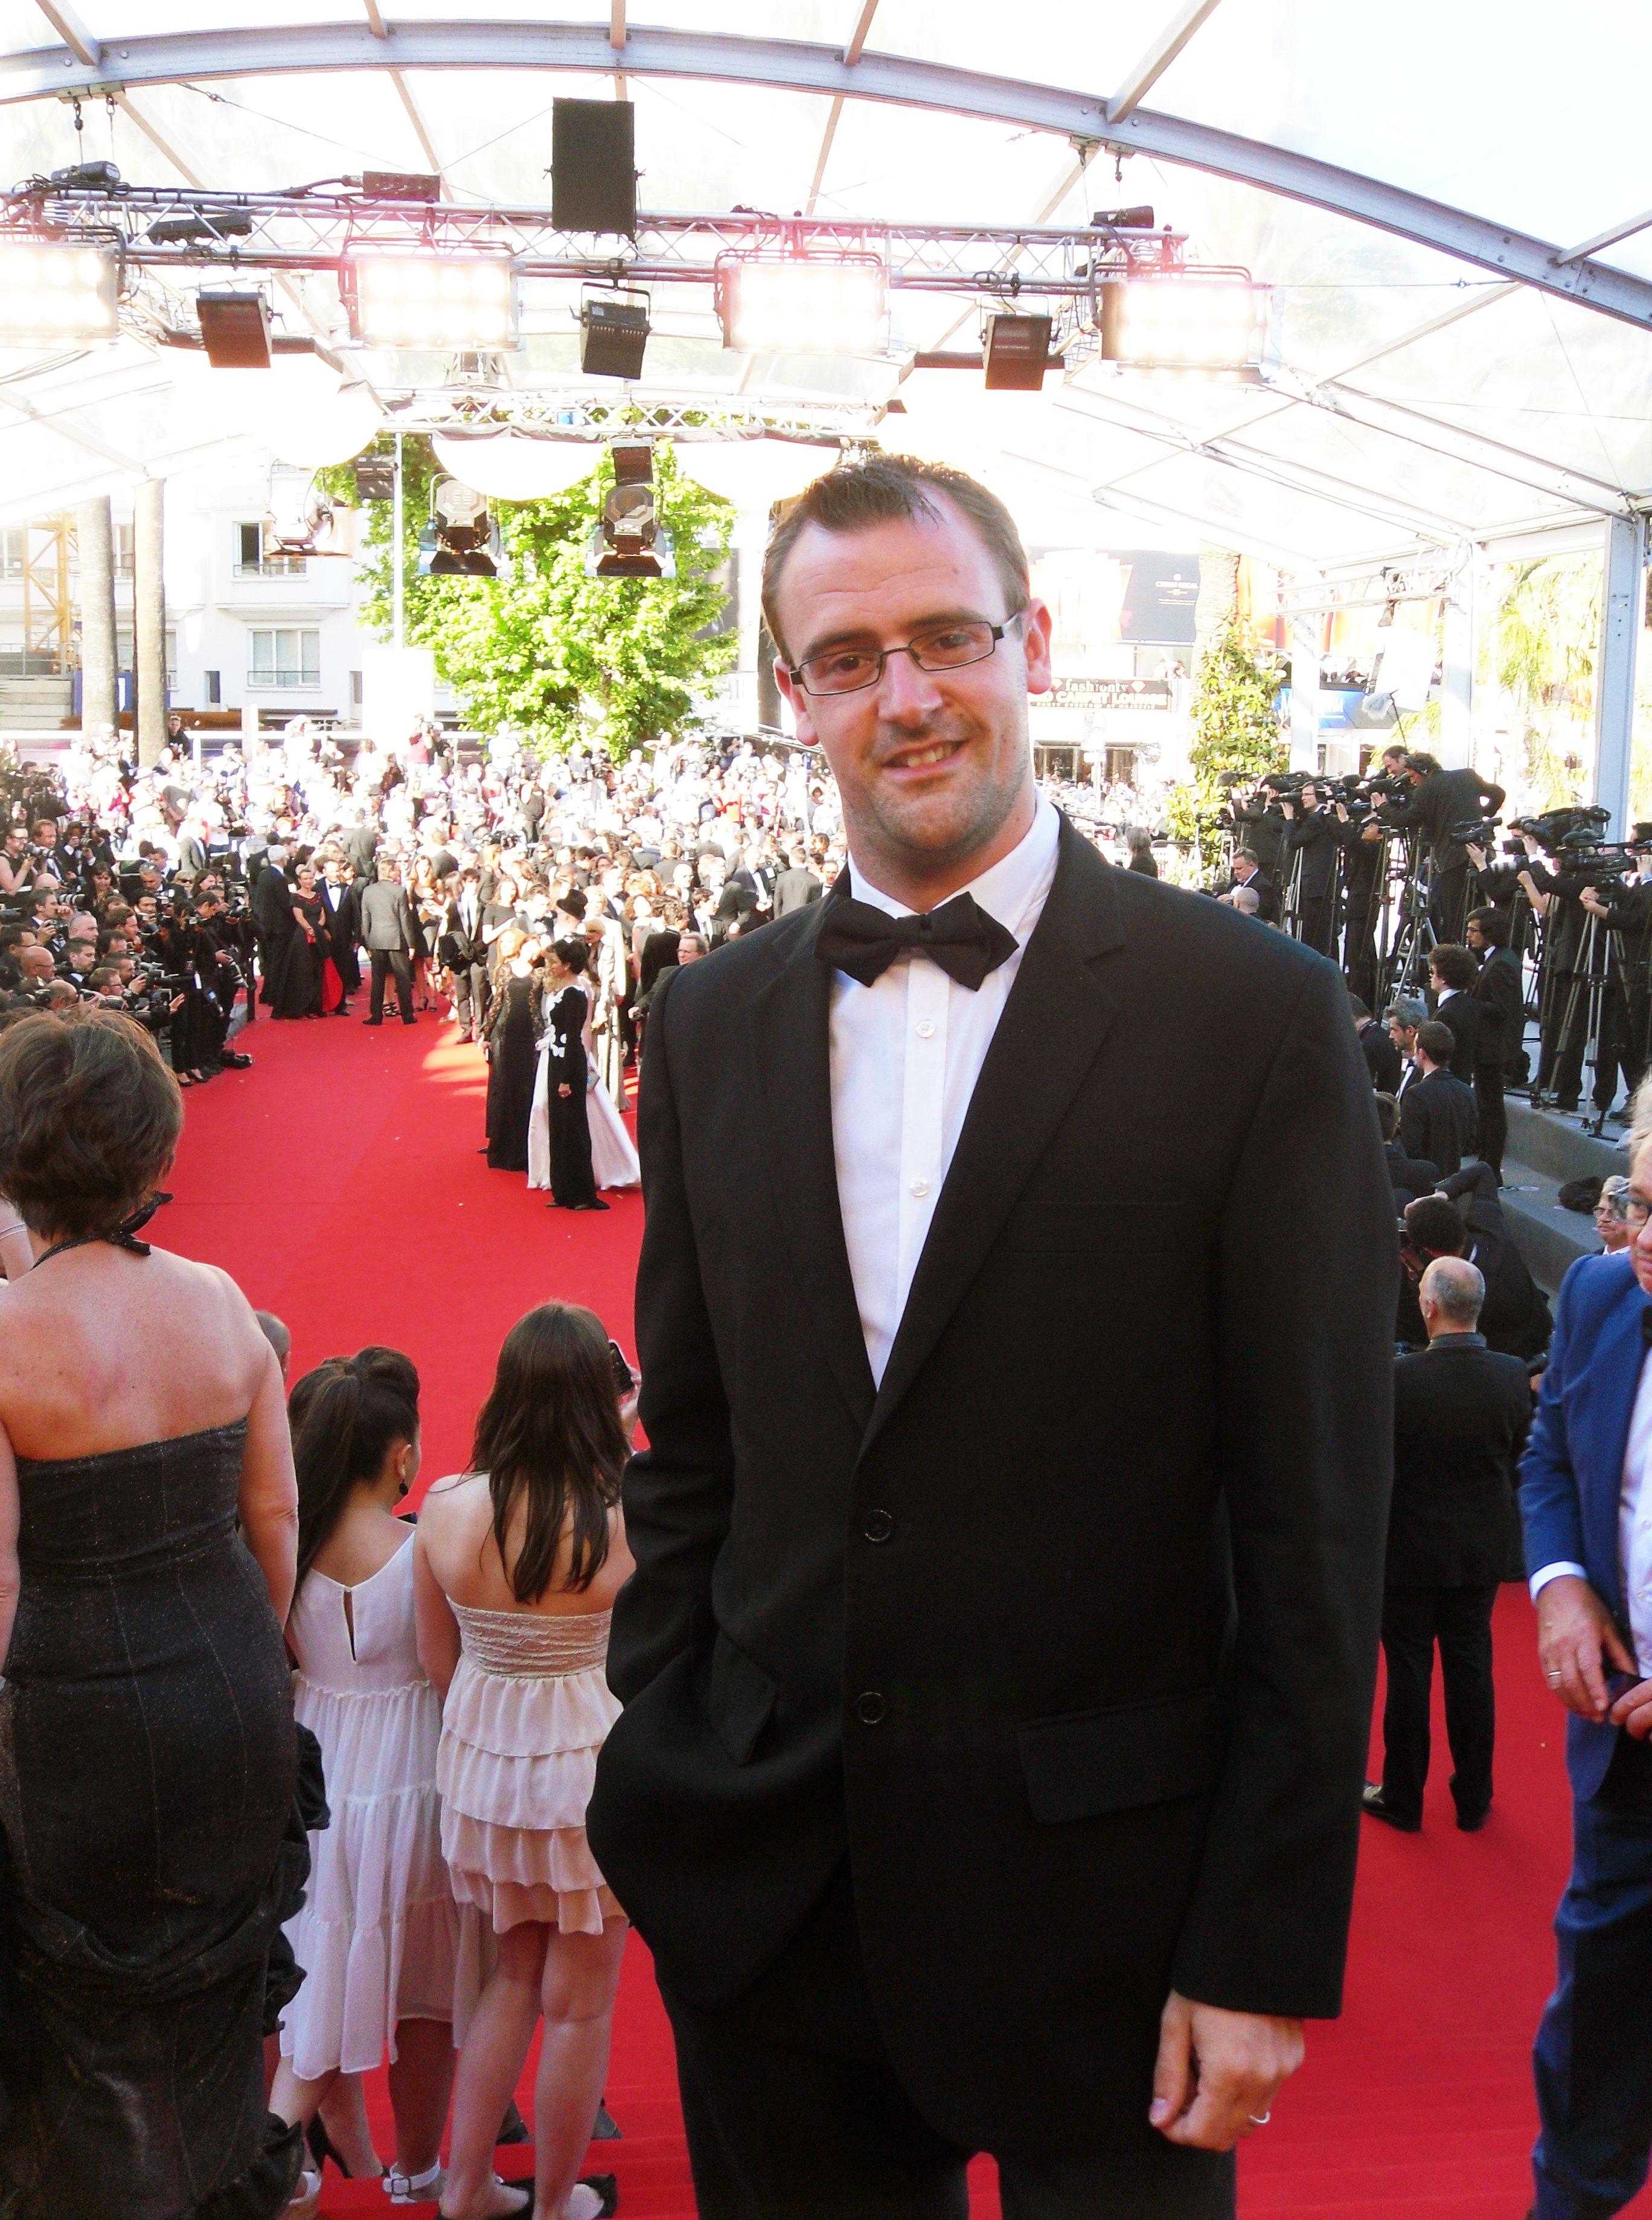 At the red carpet premiere of Alexander Payne's 'Nebraska' at the 2013 Cannes Film Festival